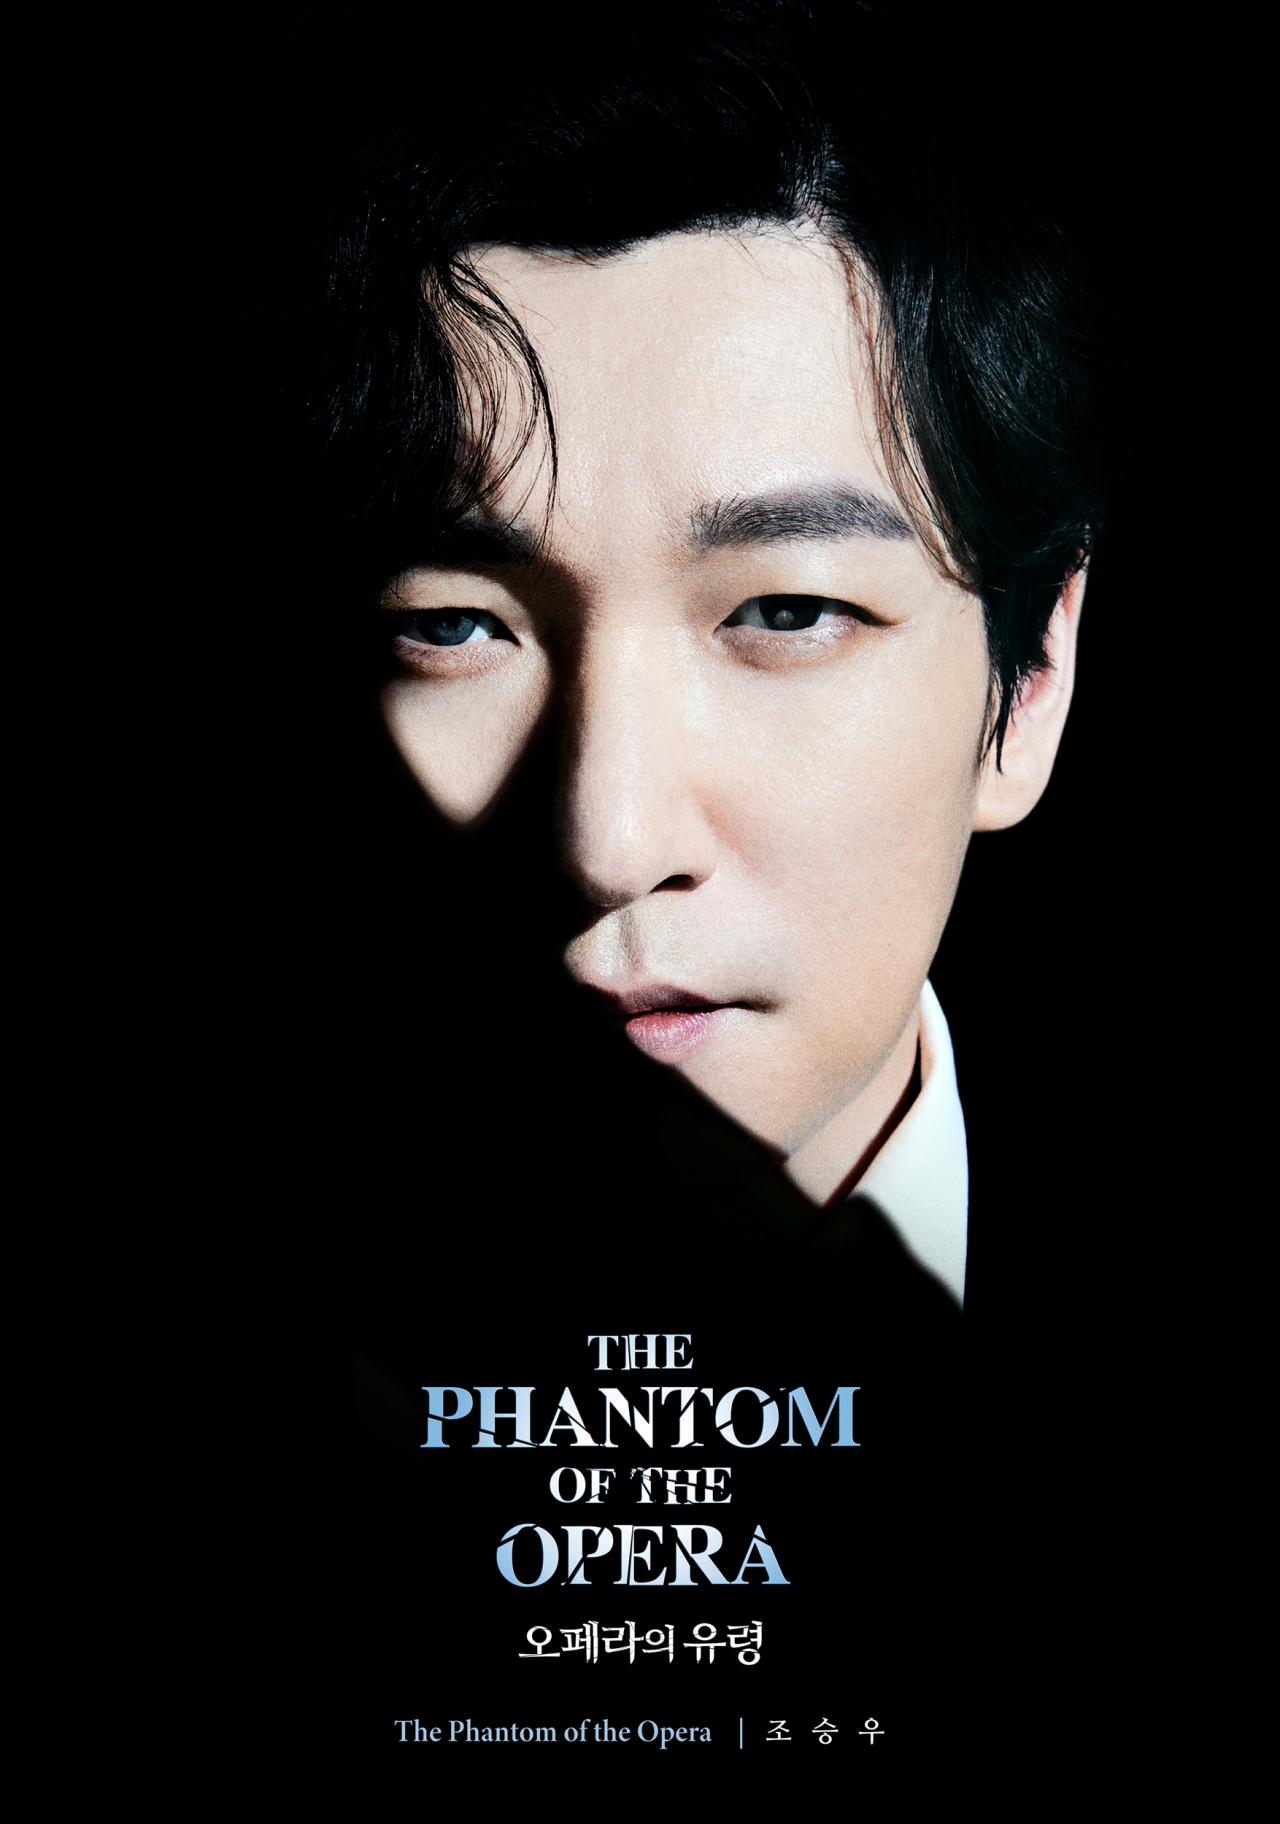 Actor Cho Seung-woo will play the role of Phantom. (S&CO)